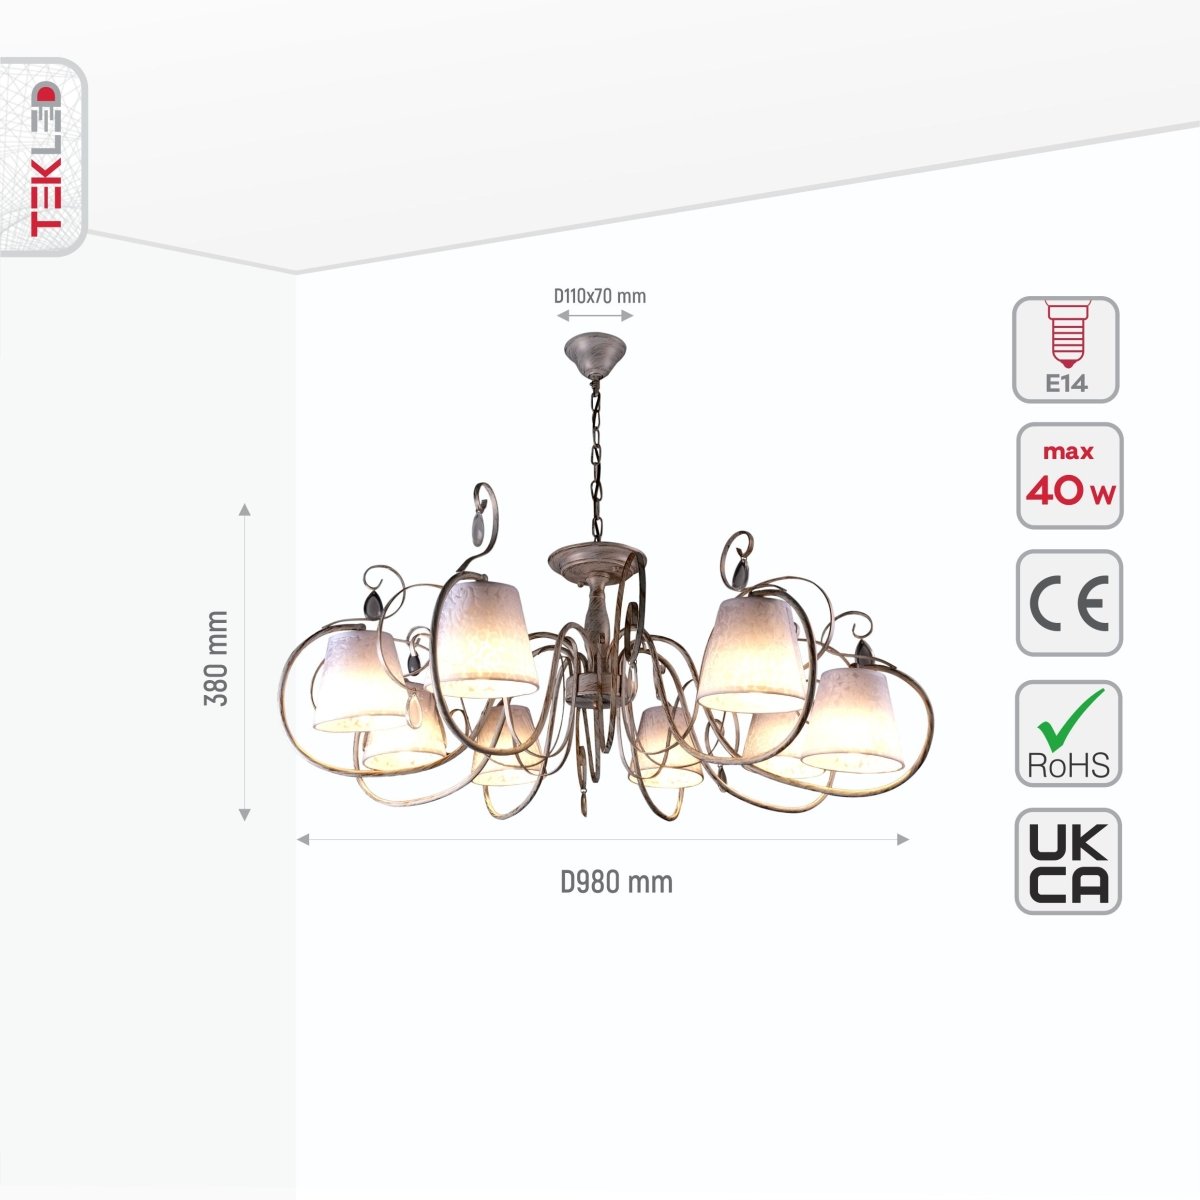 Size and specs of Creamy White Shade Rice White Gold Brushed 8 Arm Chandelier with 8xE14 Fitting | TEKLED 158-17824